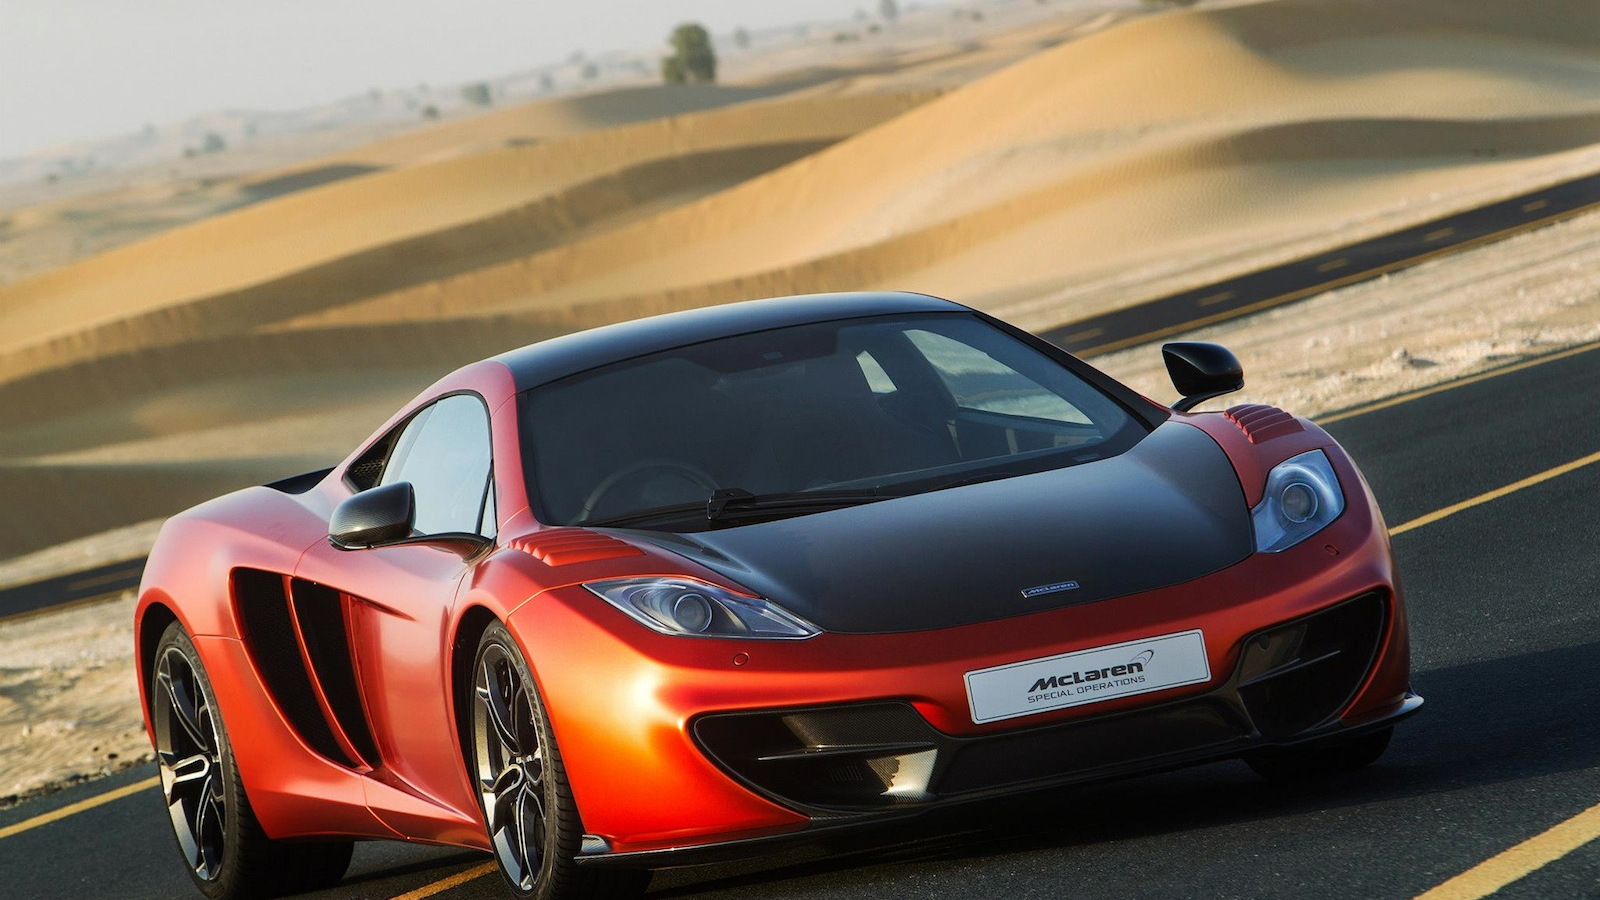 McLaren MP4-12C, fitted with Special Operations accessories